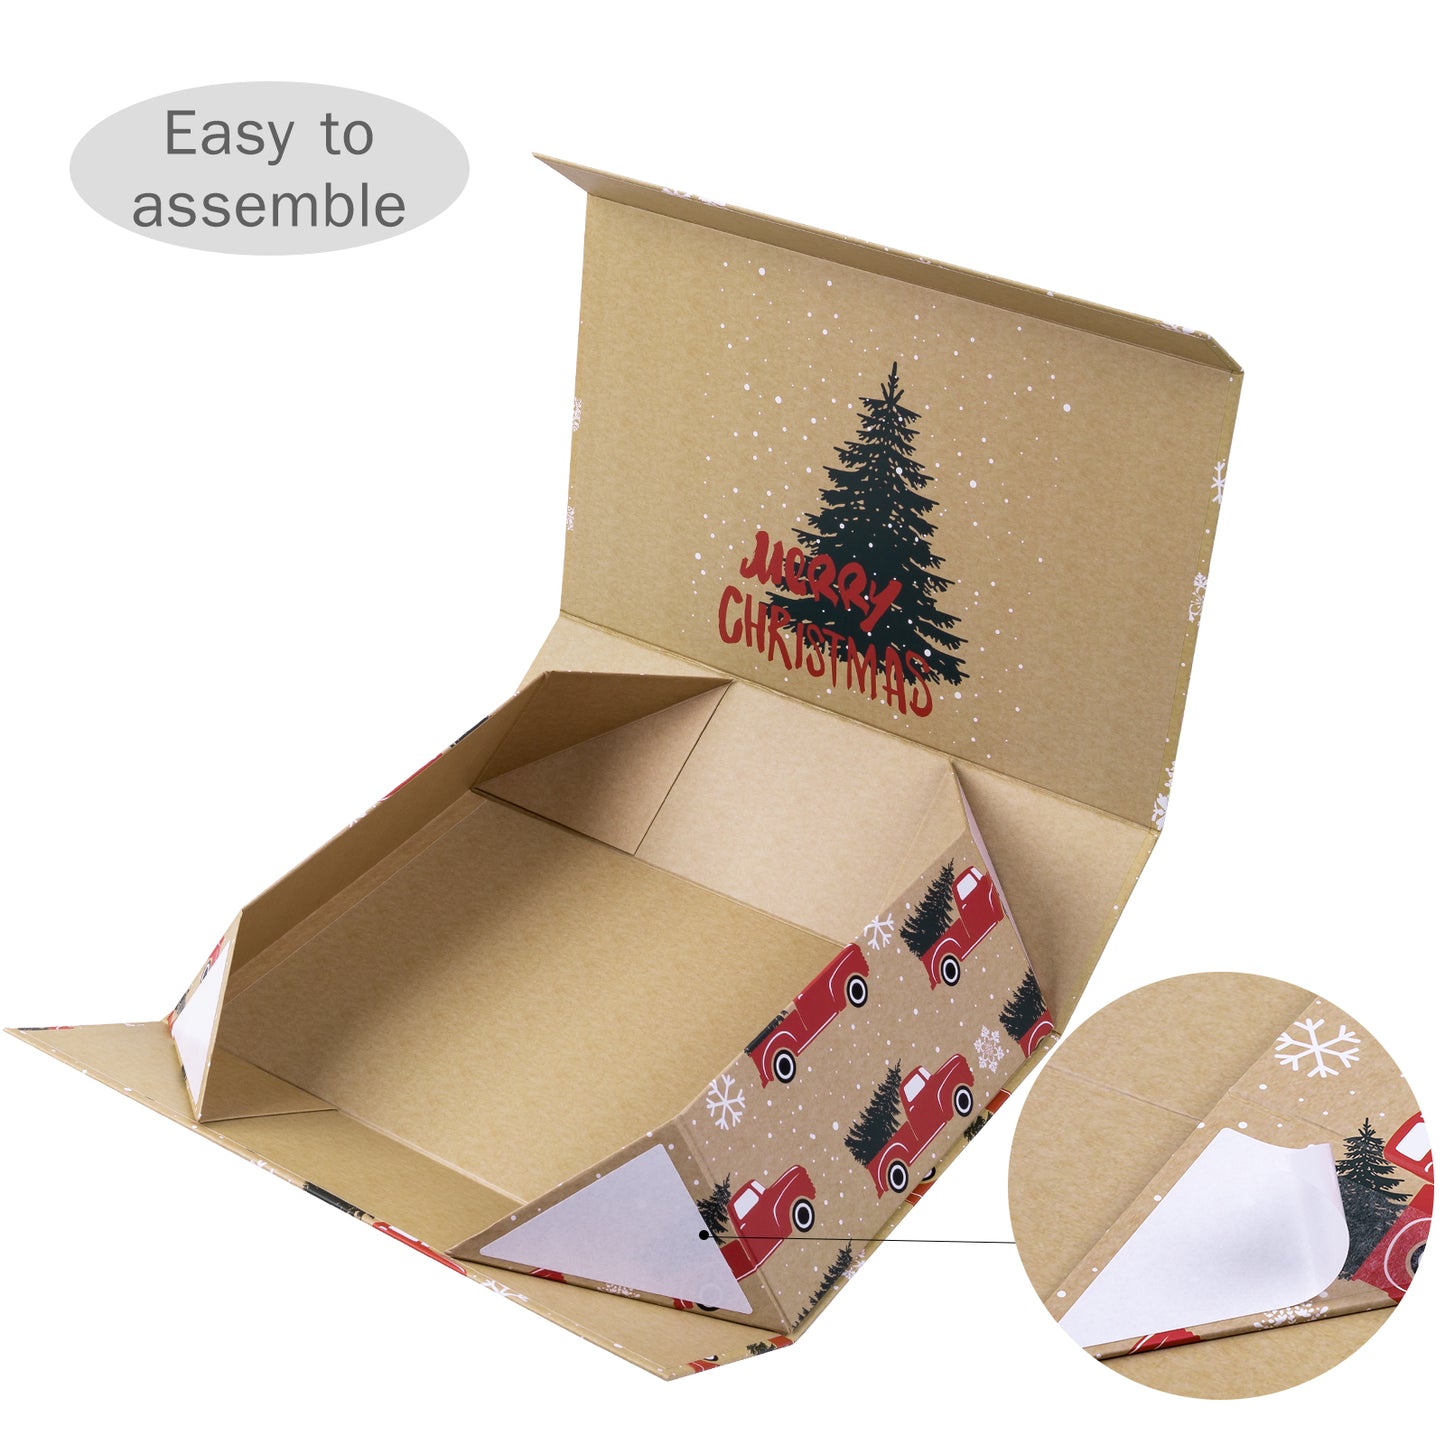 35x23x10cm Collapsible Gift Box Magnetic Closure Tree Farm Car Wedding Party Christmas Wrapping